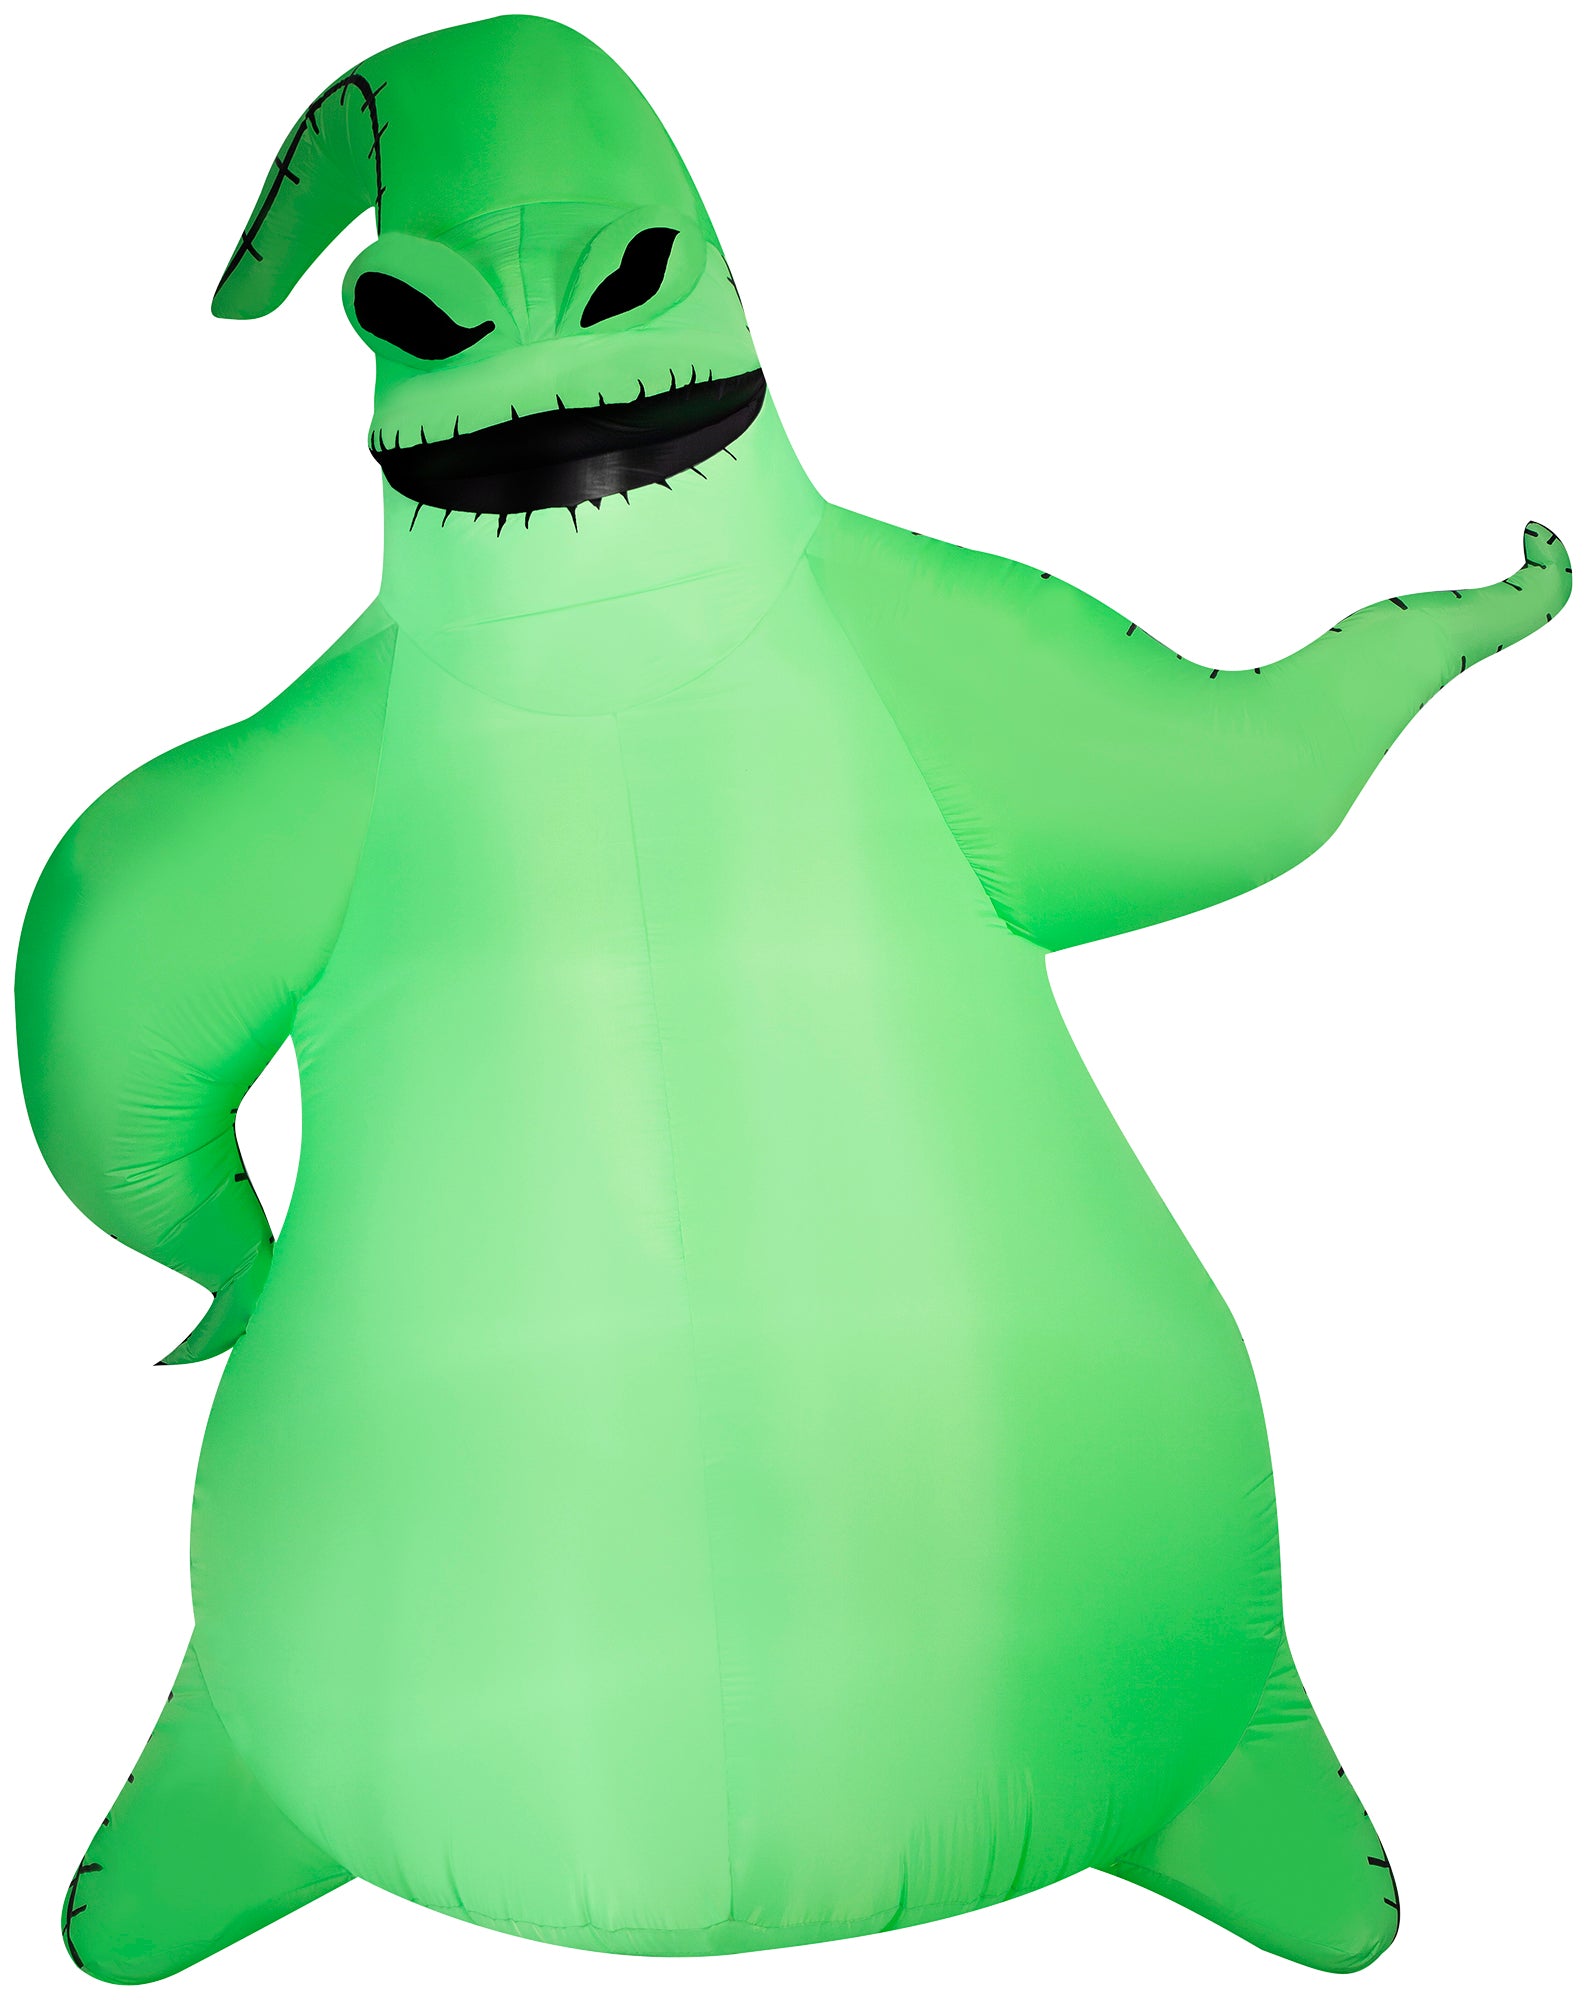 10.5 Foot The Nightmare Before Christmas Green Oogie Boogie Light Up Halloween Inflatable Lawn Decor - costumes.com